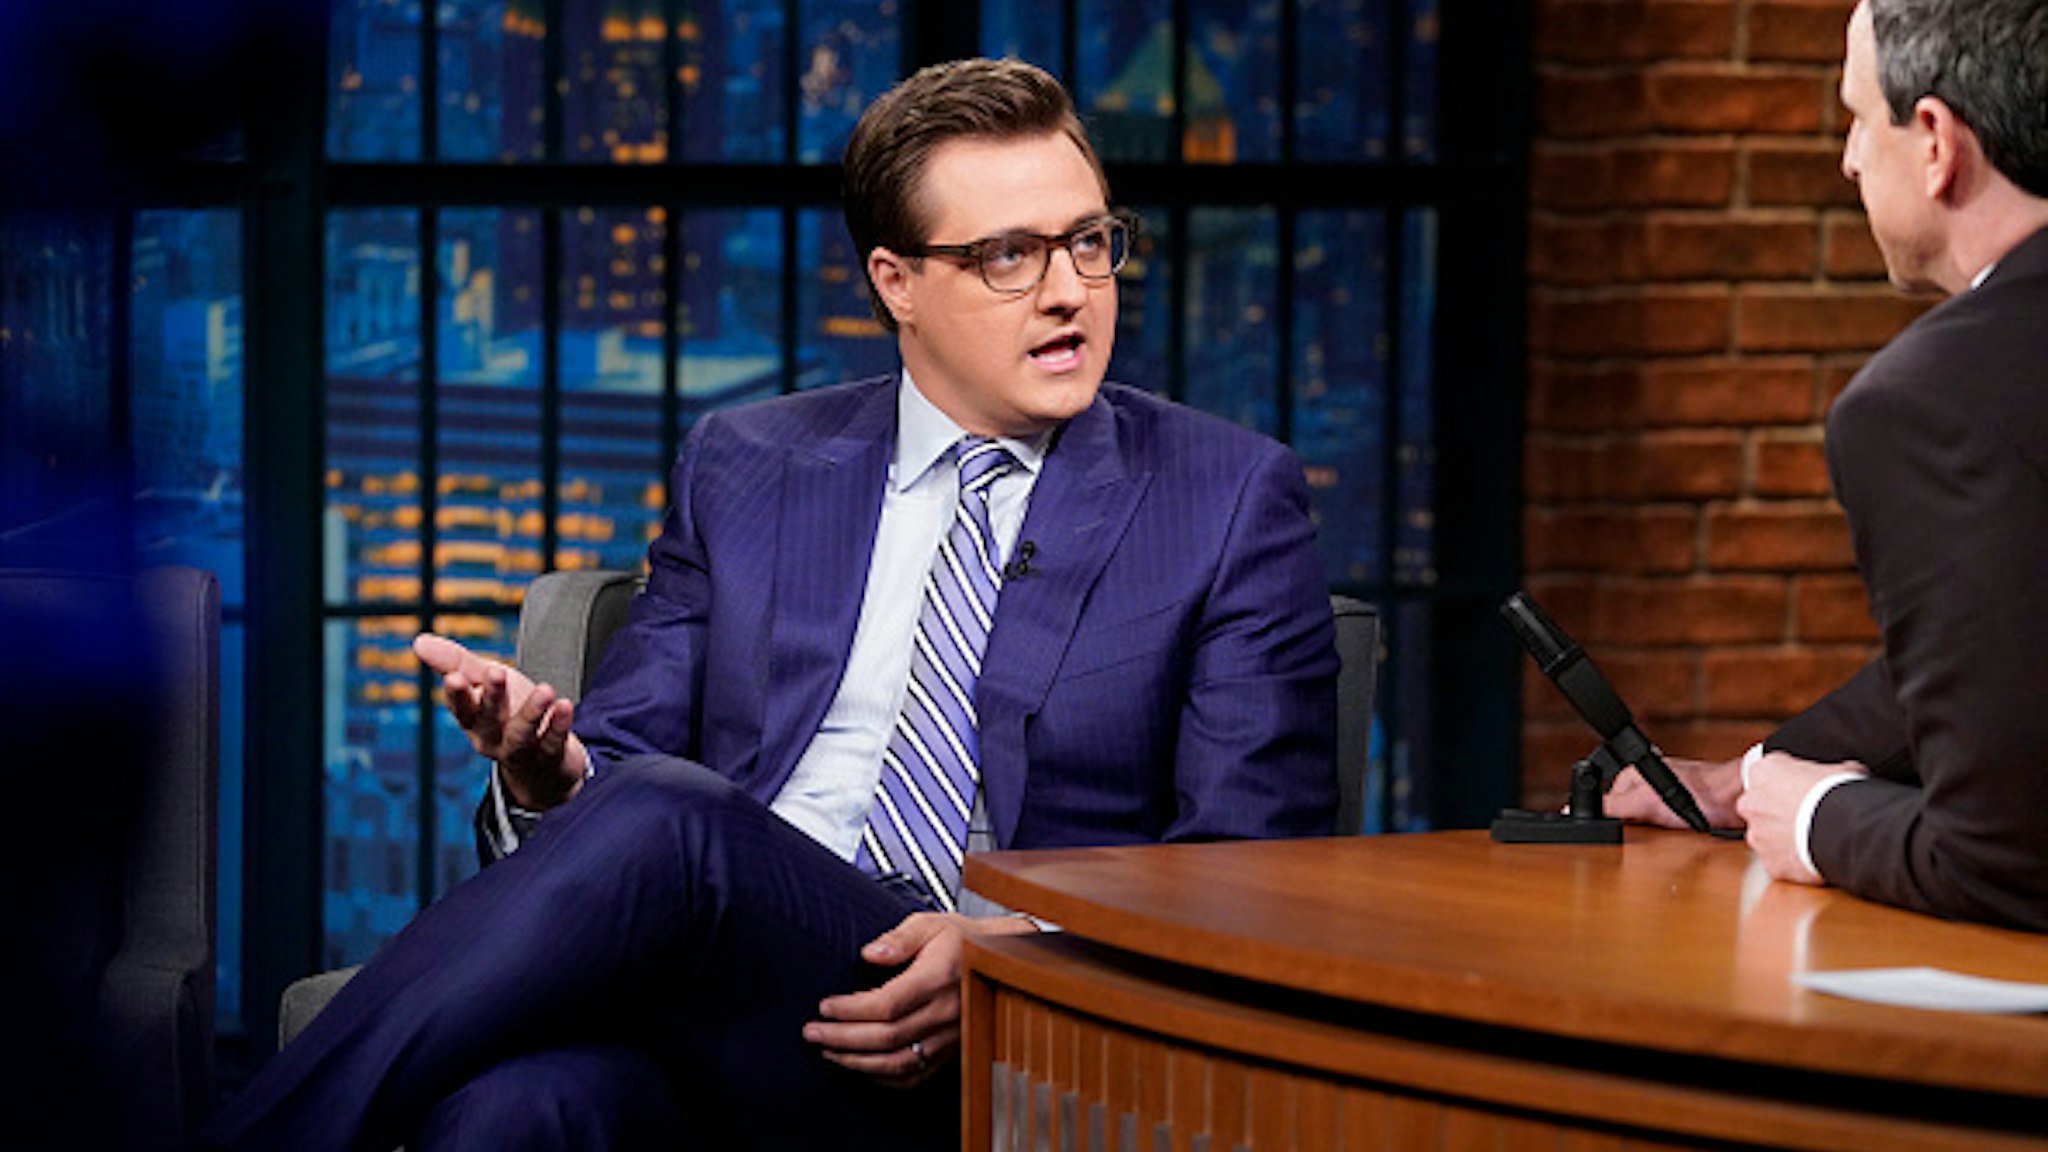 LATE NIGHT WITH SETH MEYERS -- Episode 677 -- Pictured: (l-r) MSNBC's Chris Hayes during an interview with host Seth Meyers on April 26, 2018 --